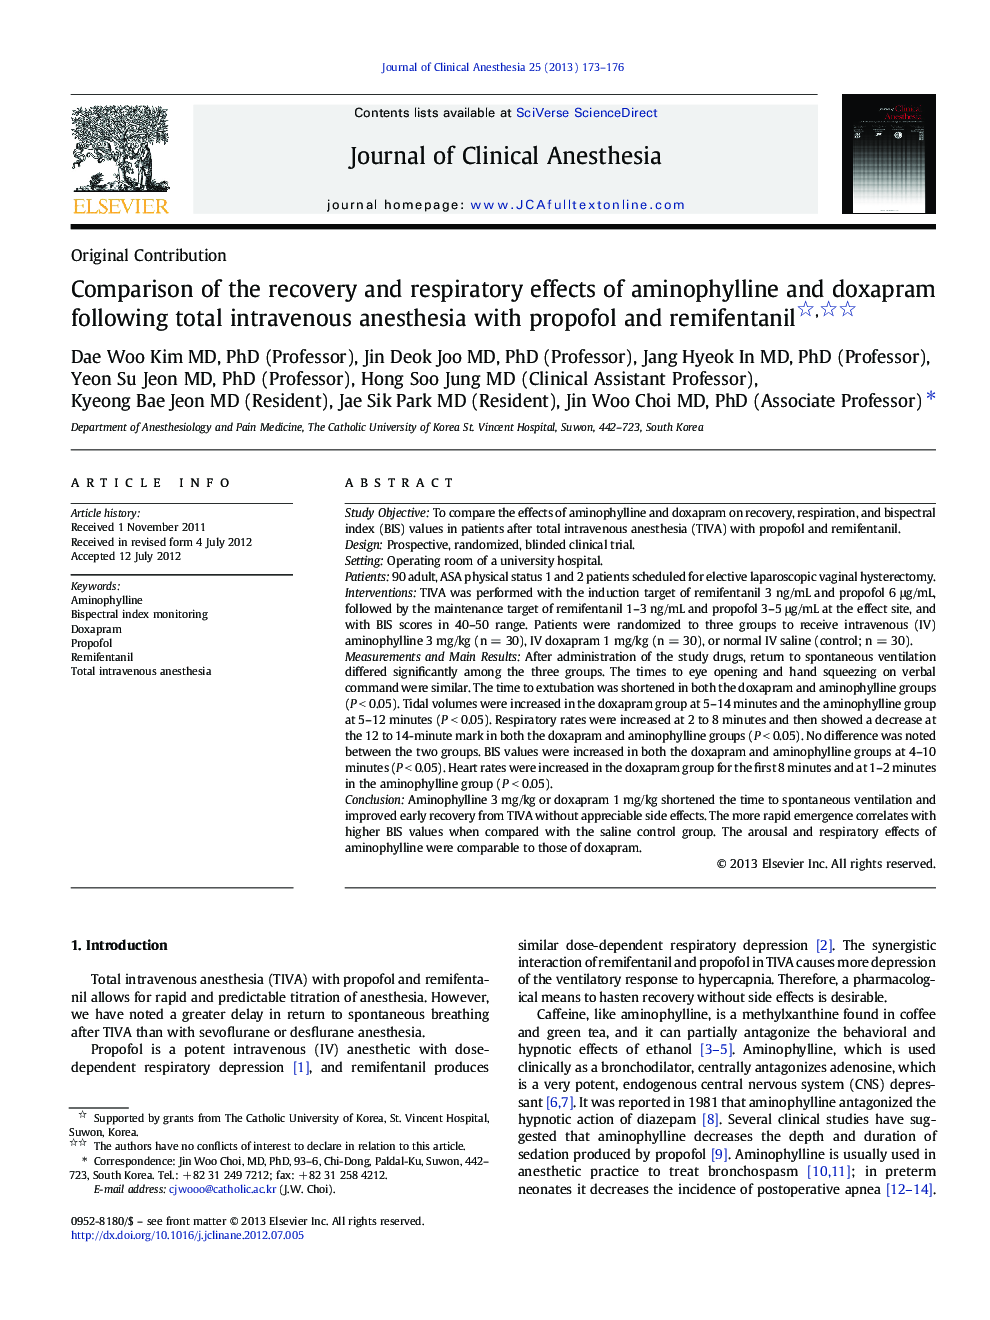 Comparison of the recovery and respiratory effects of aminophylline and doxapram following total intravenous anesthesia with propofol and remifentanil 